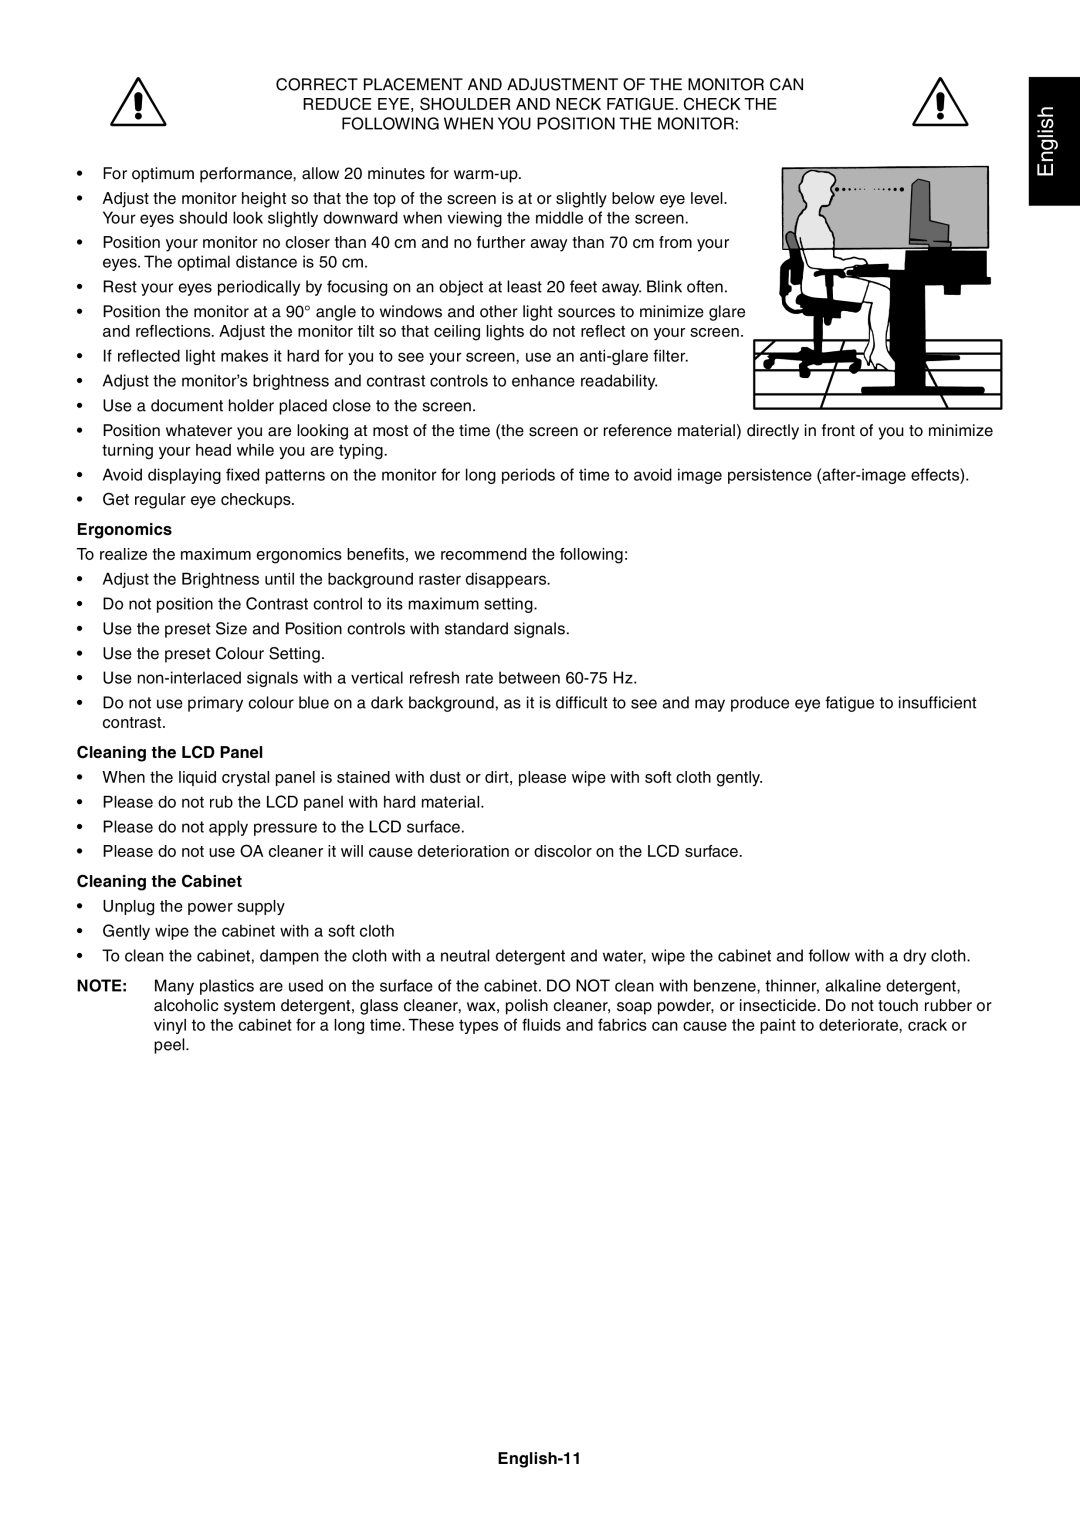 NEC LCD1970VX, LCD1970NXp user manual Ergonomics, Cleaning the LCD Panel, Cleaning the Cabinet, English-11 